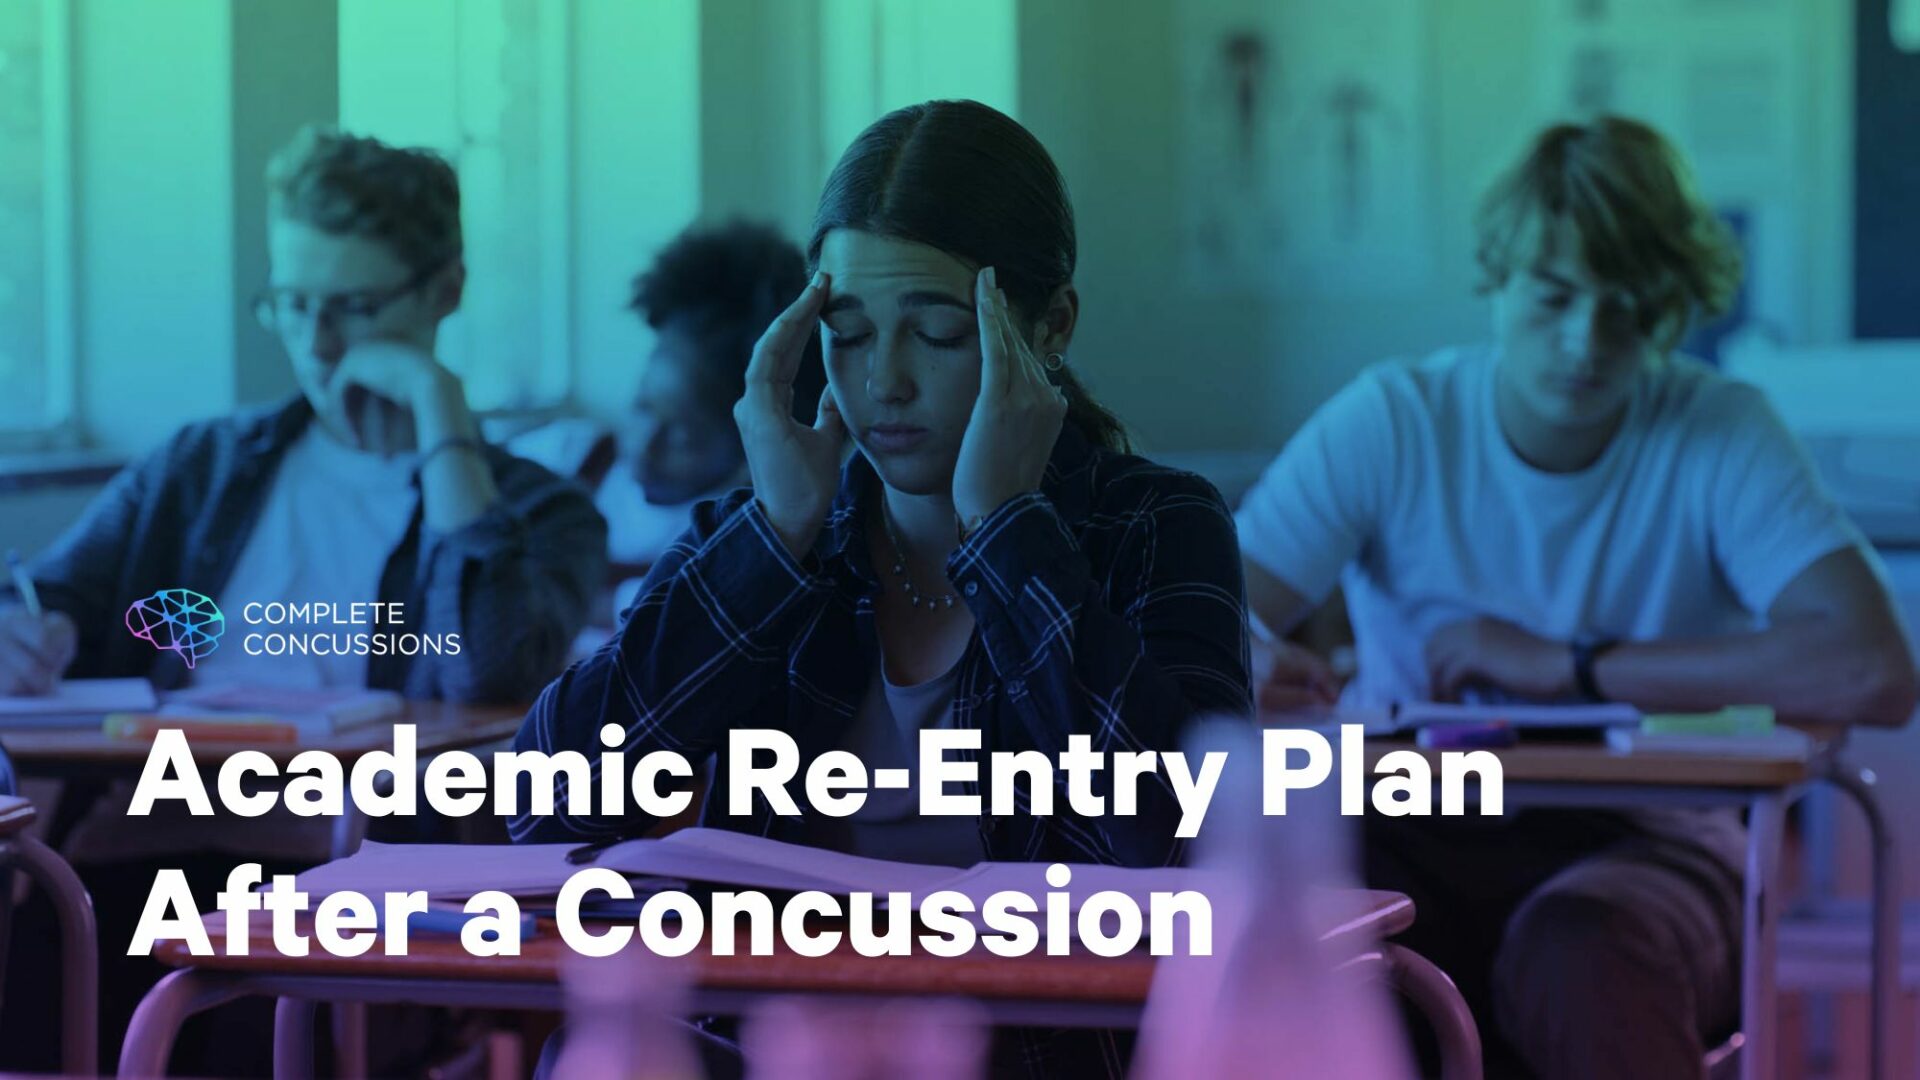 Academic Re-Entry Plan After a Concussion